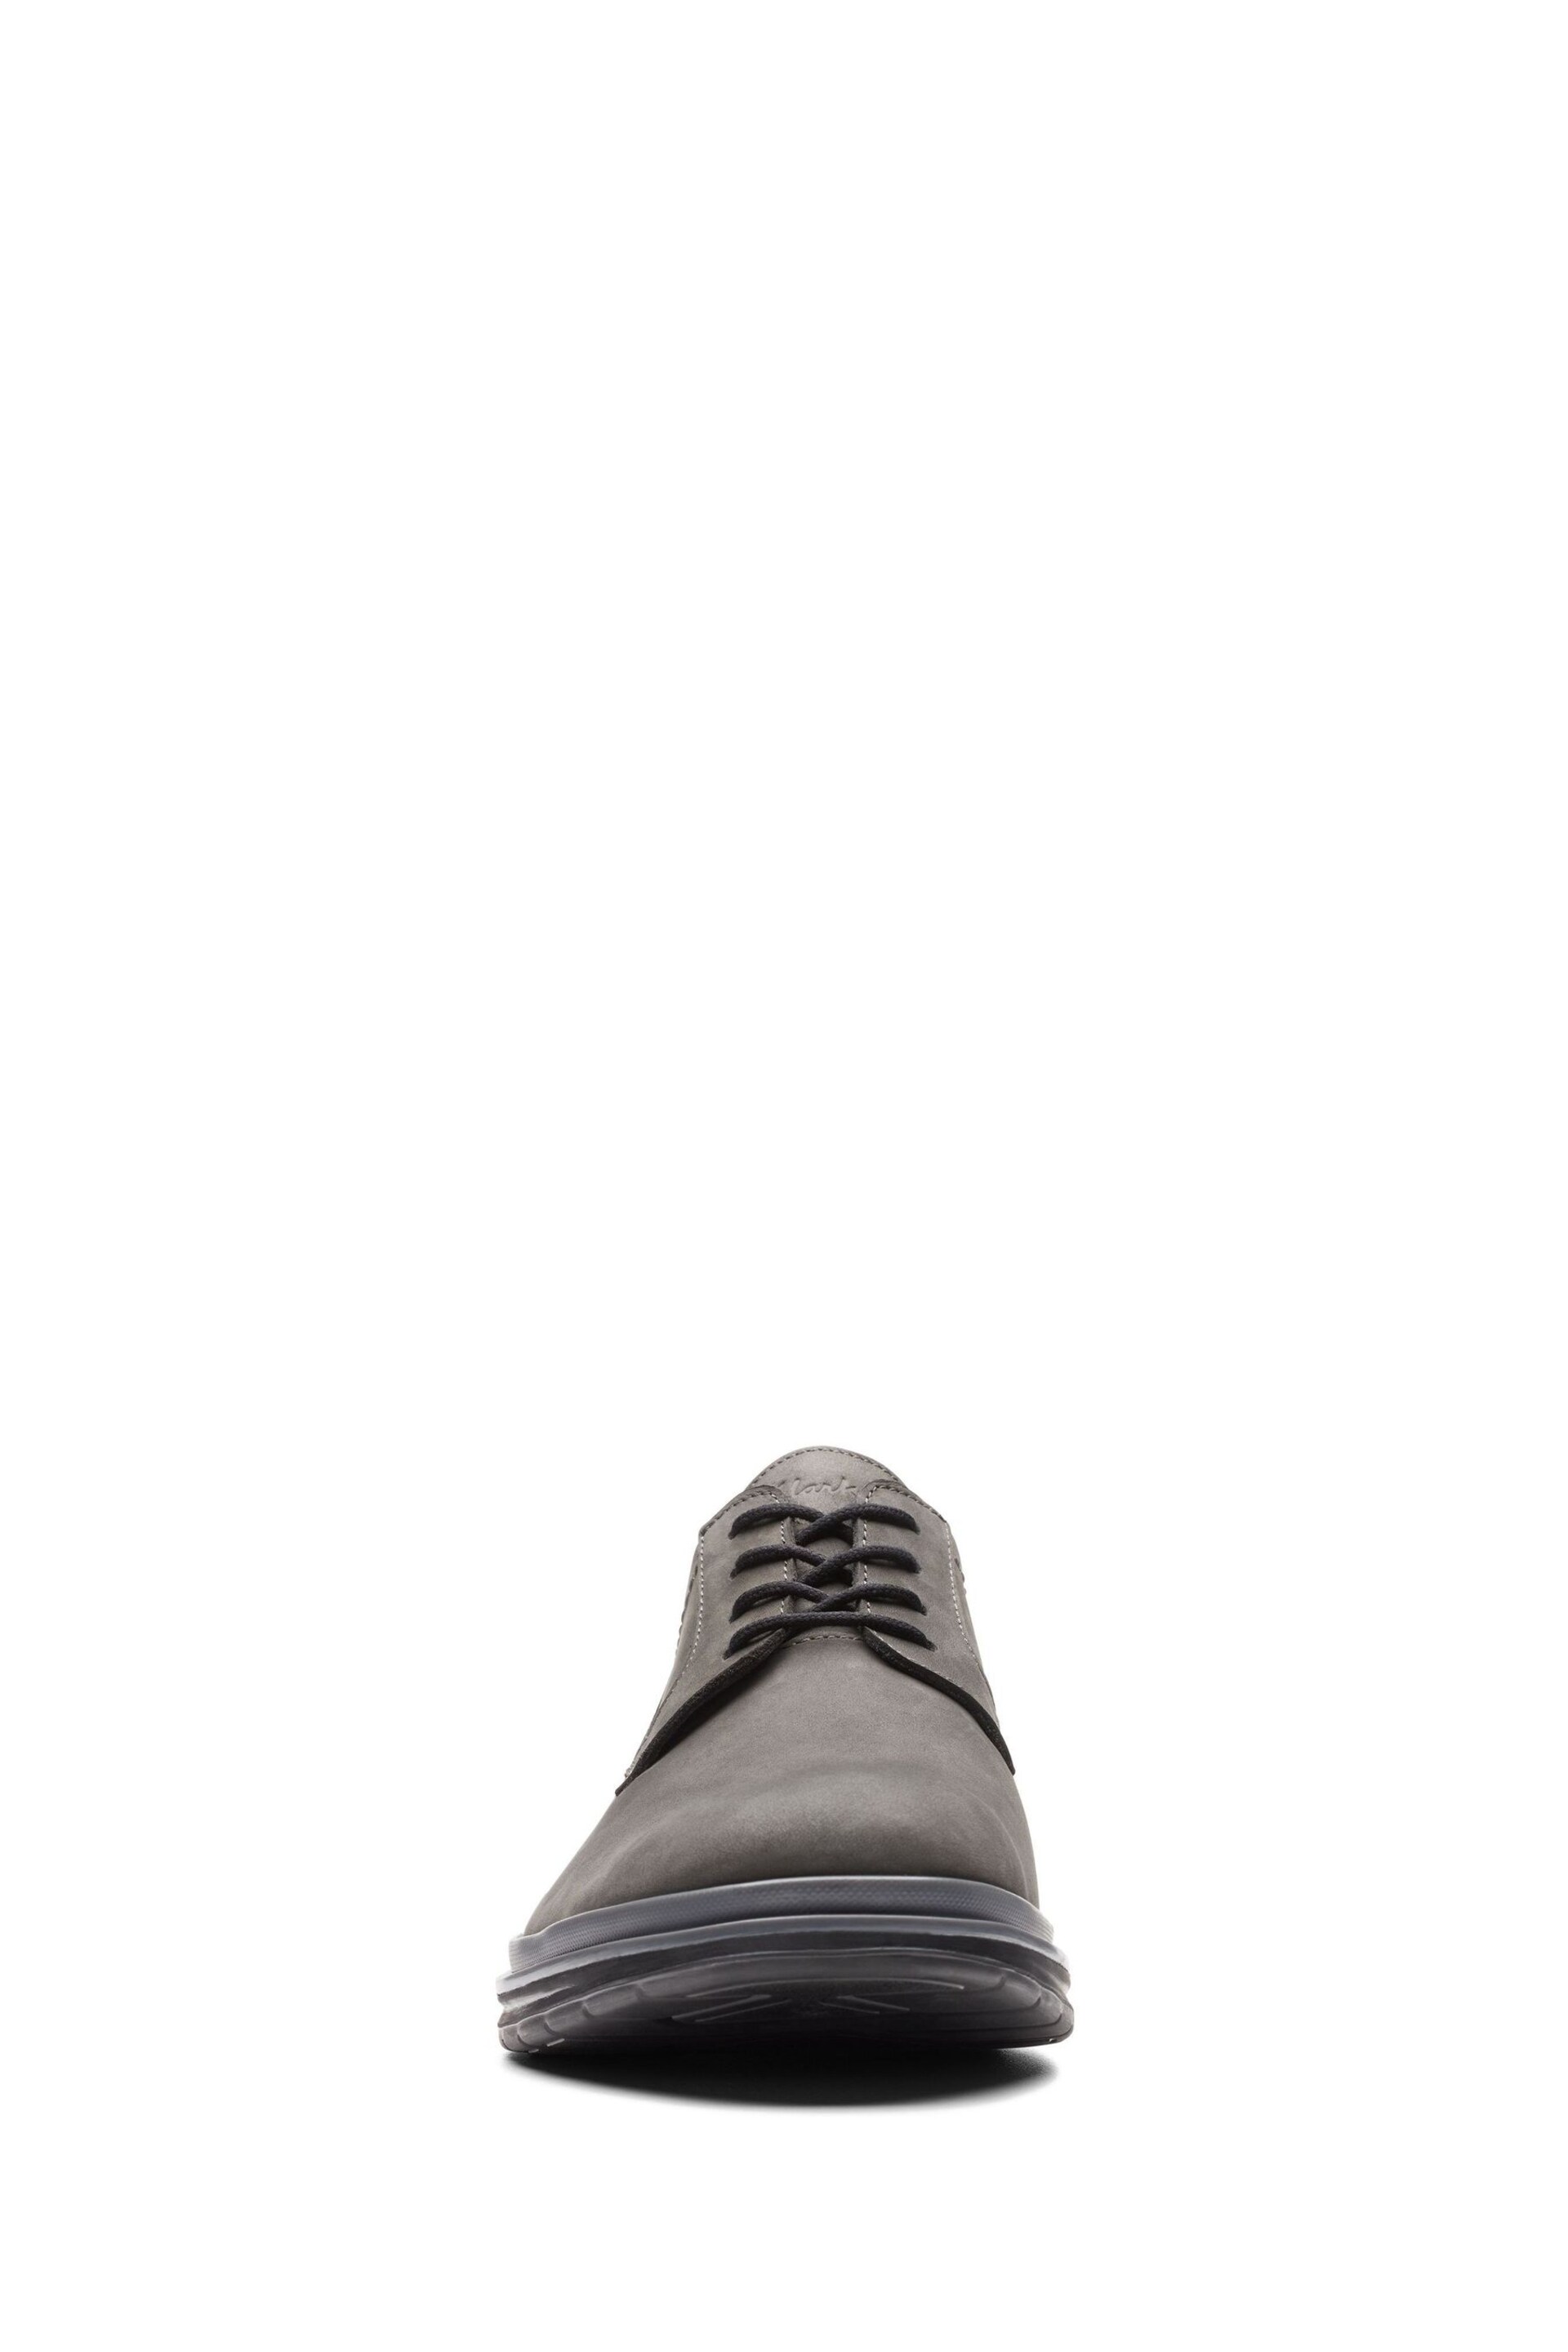 Clarks Grey Nubuck Chantry Lo Shoes - Image 5 of 7